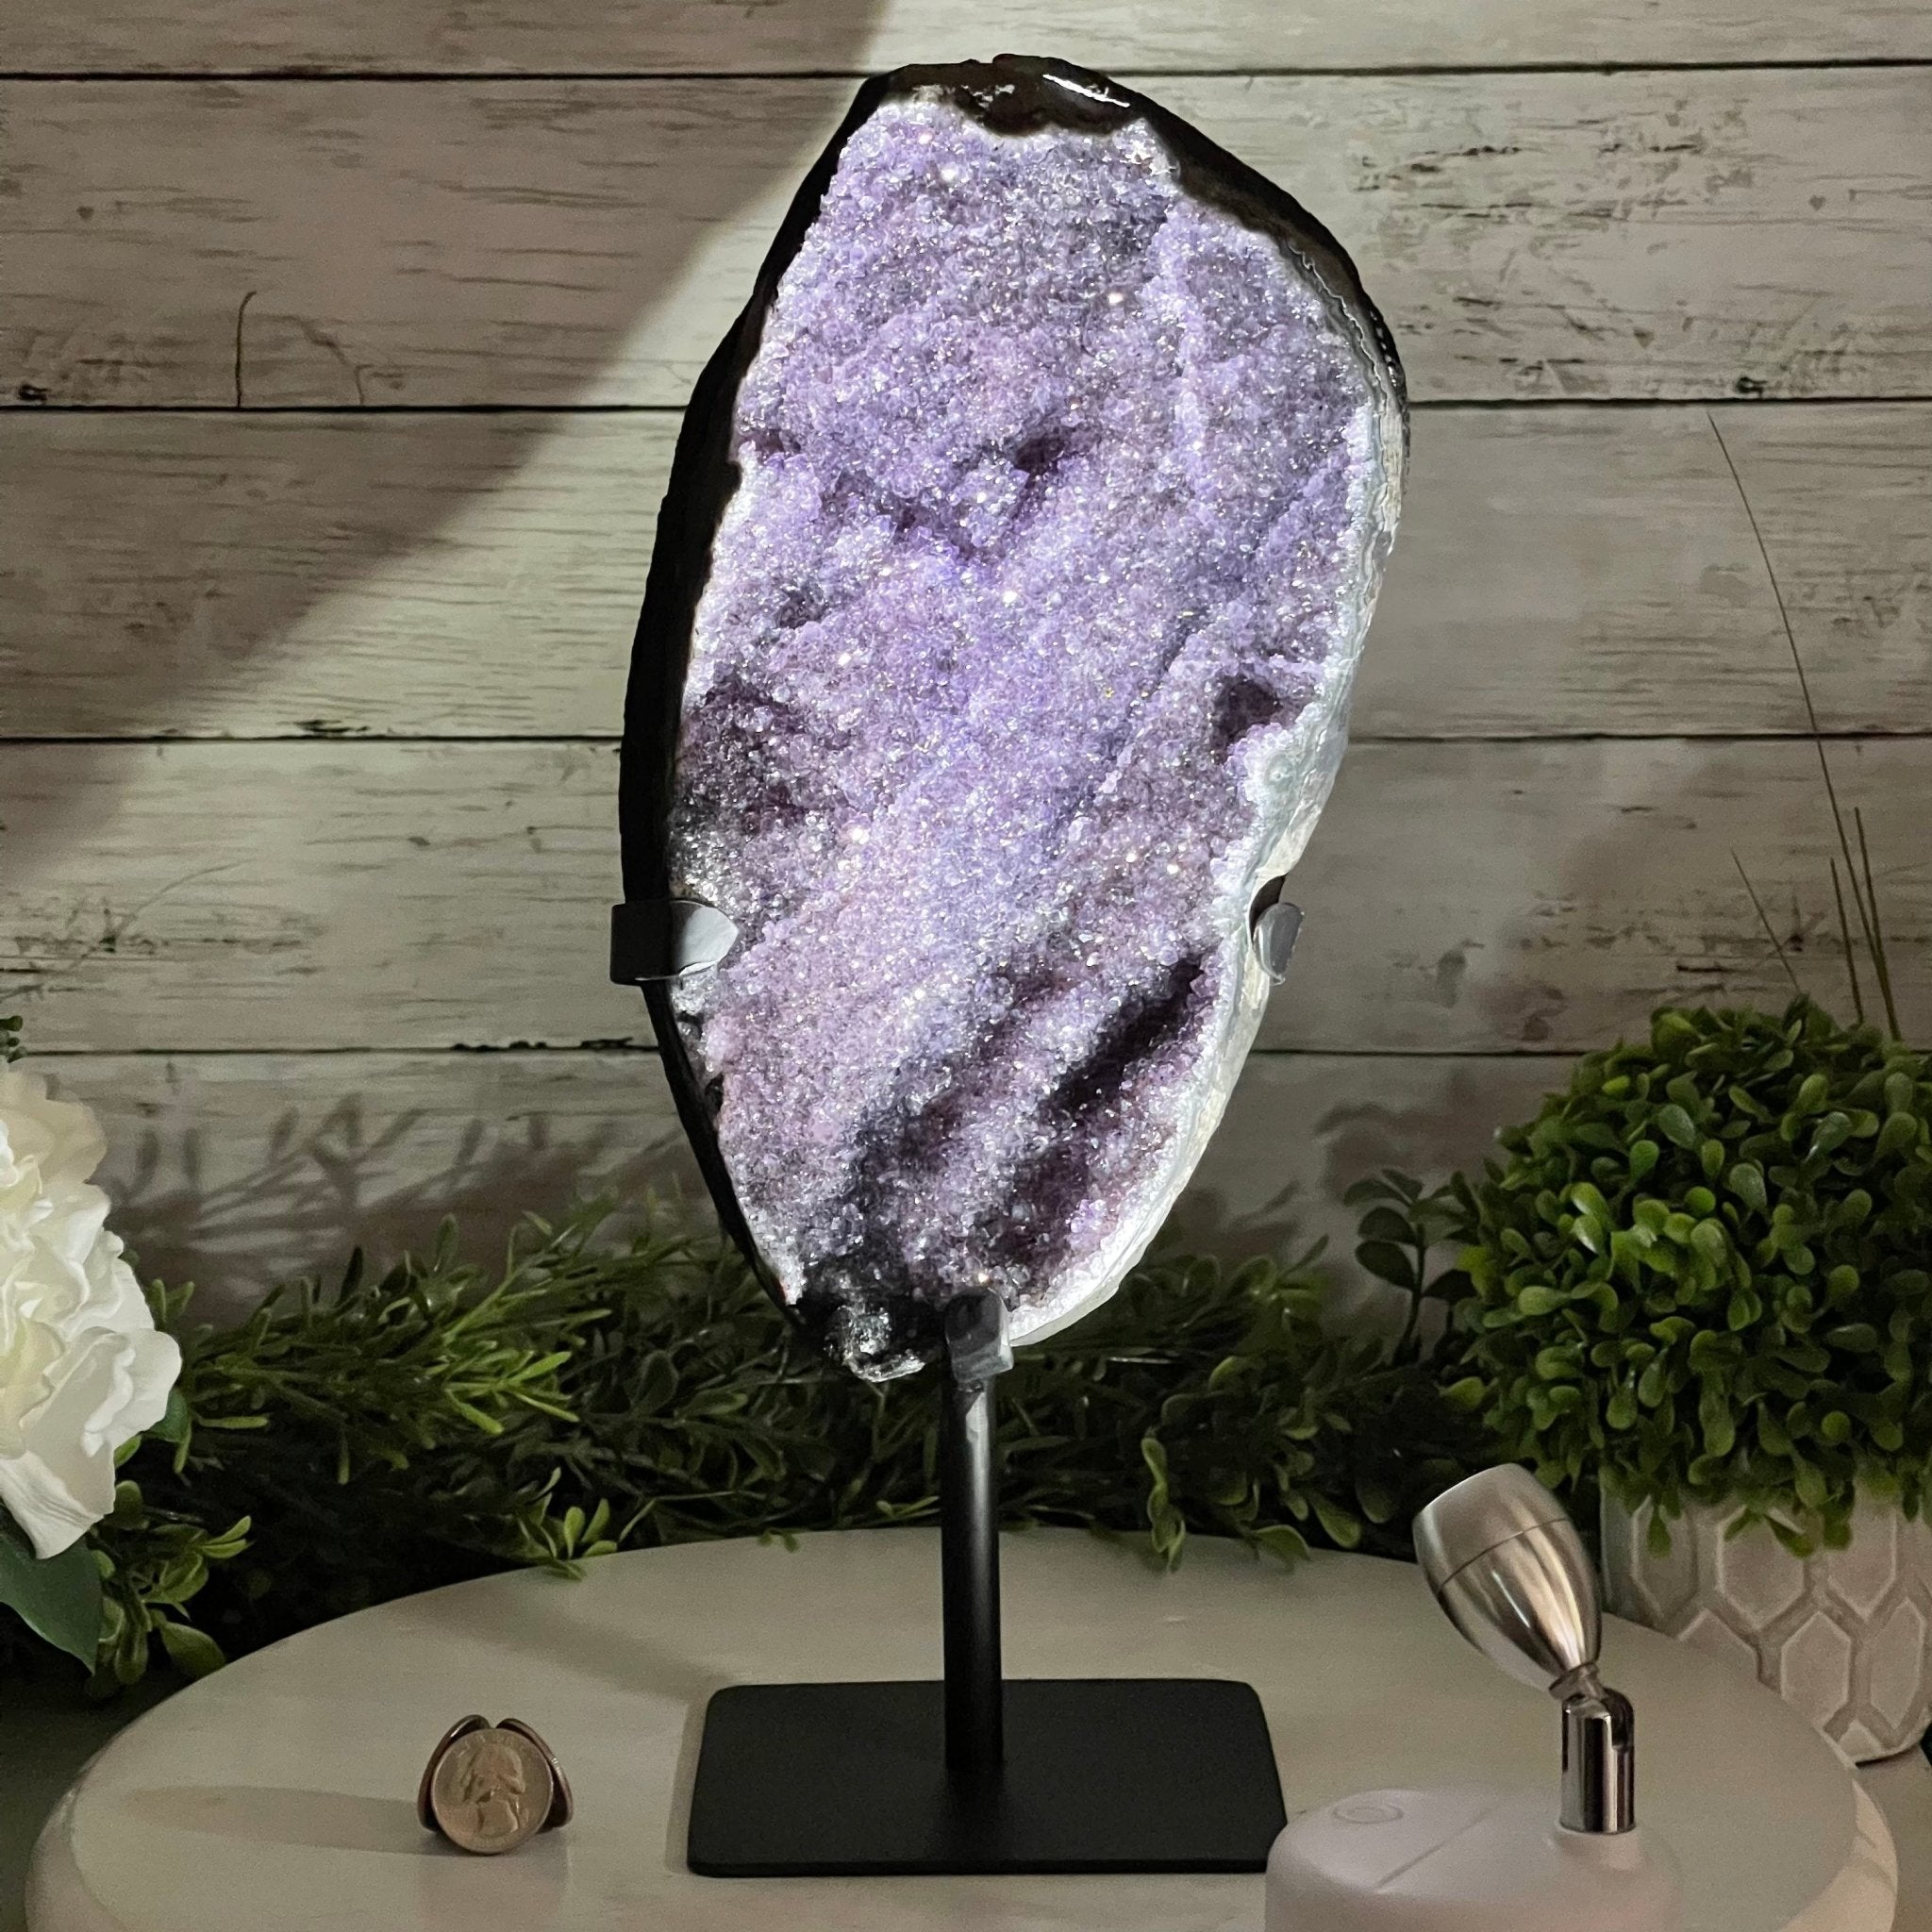 Extra Plus Quality Amethyst Druse Cluster on Metal Stand, 12.5 lbs & 14" tall #5491-0046 by Brazil Gems - Brazil GemsBrazil GemsExtra Plus Quality Amethyst Druse Cluster on Metal Stand, 12.5 lbs & 14" tall #5491-0046 by Brazil GemsClusters on Fixed Bases5491-0046